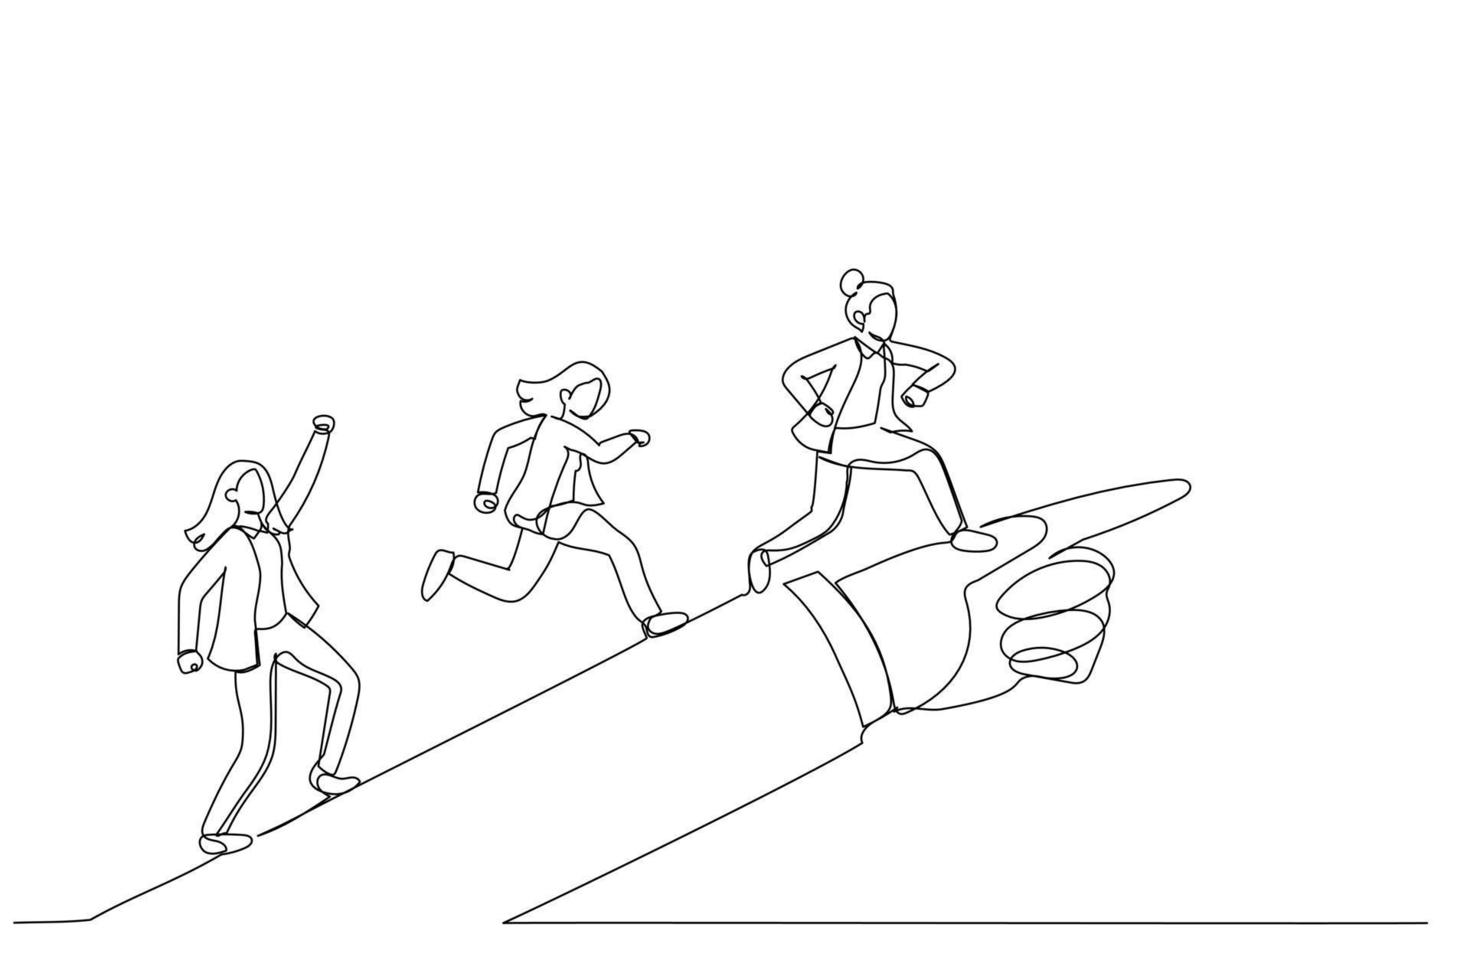 Drawing of businesswoman running forward looking for success in the way showed by giant hand of leader. Metaphor for directional leadership. Single continuous line art style vector